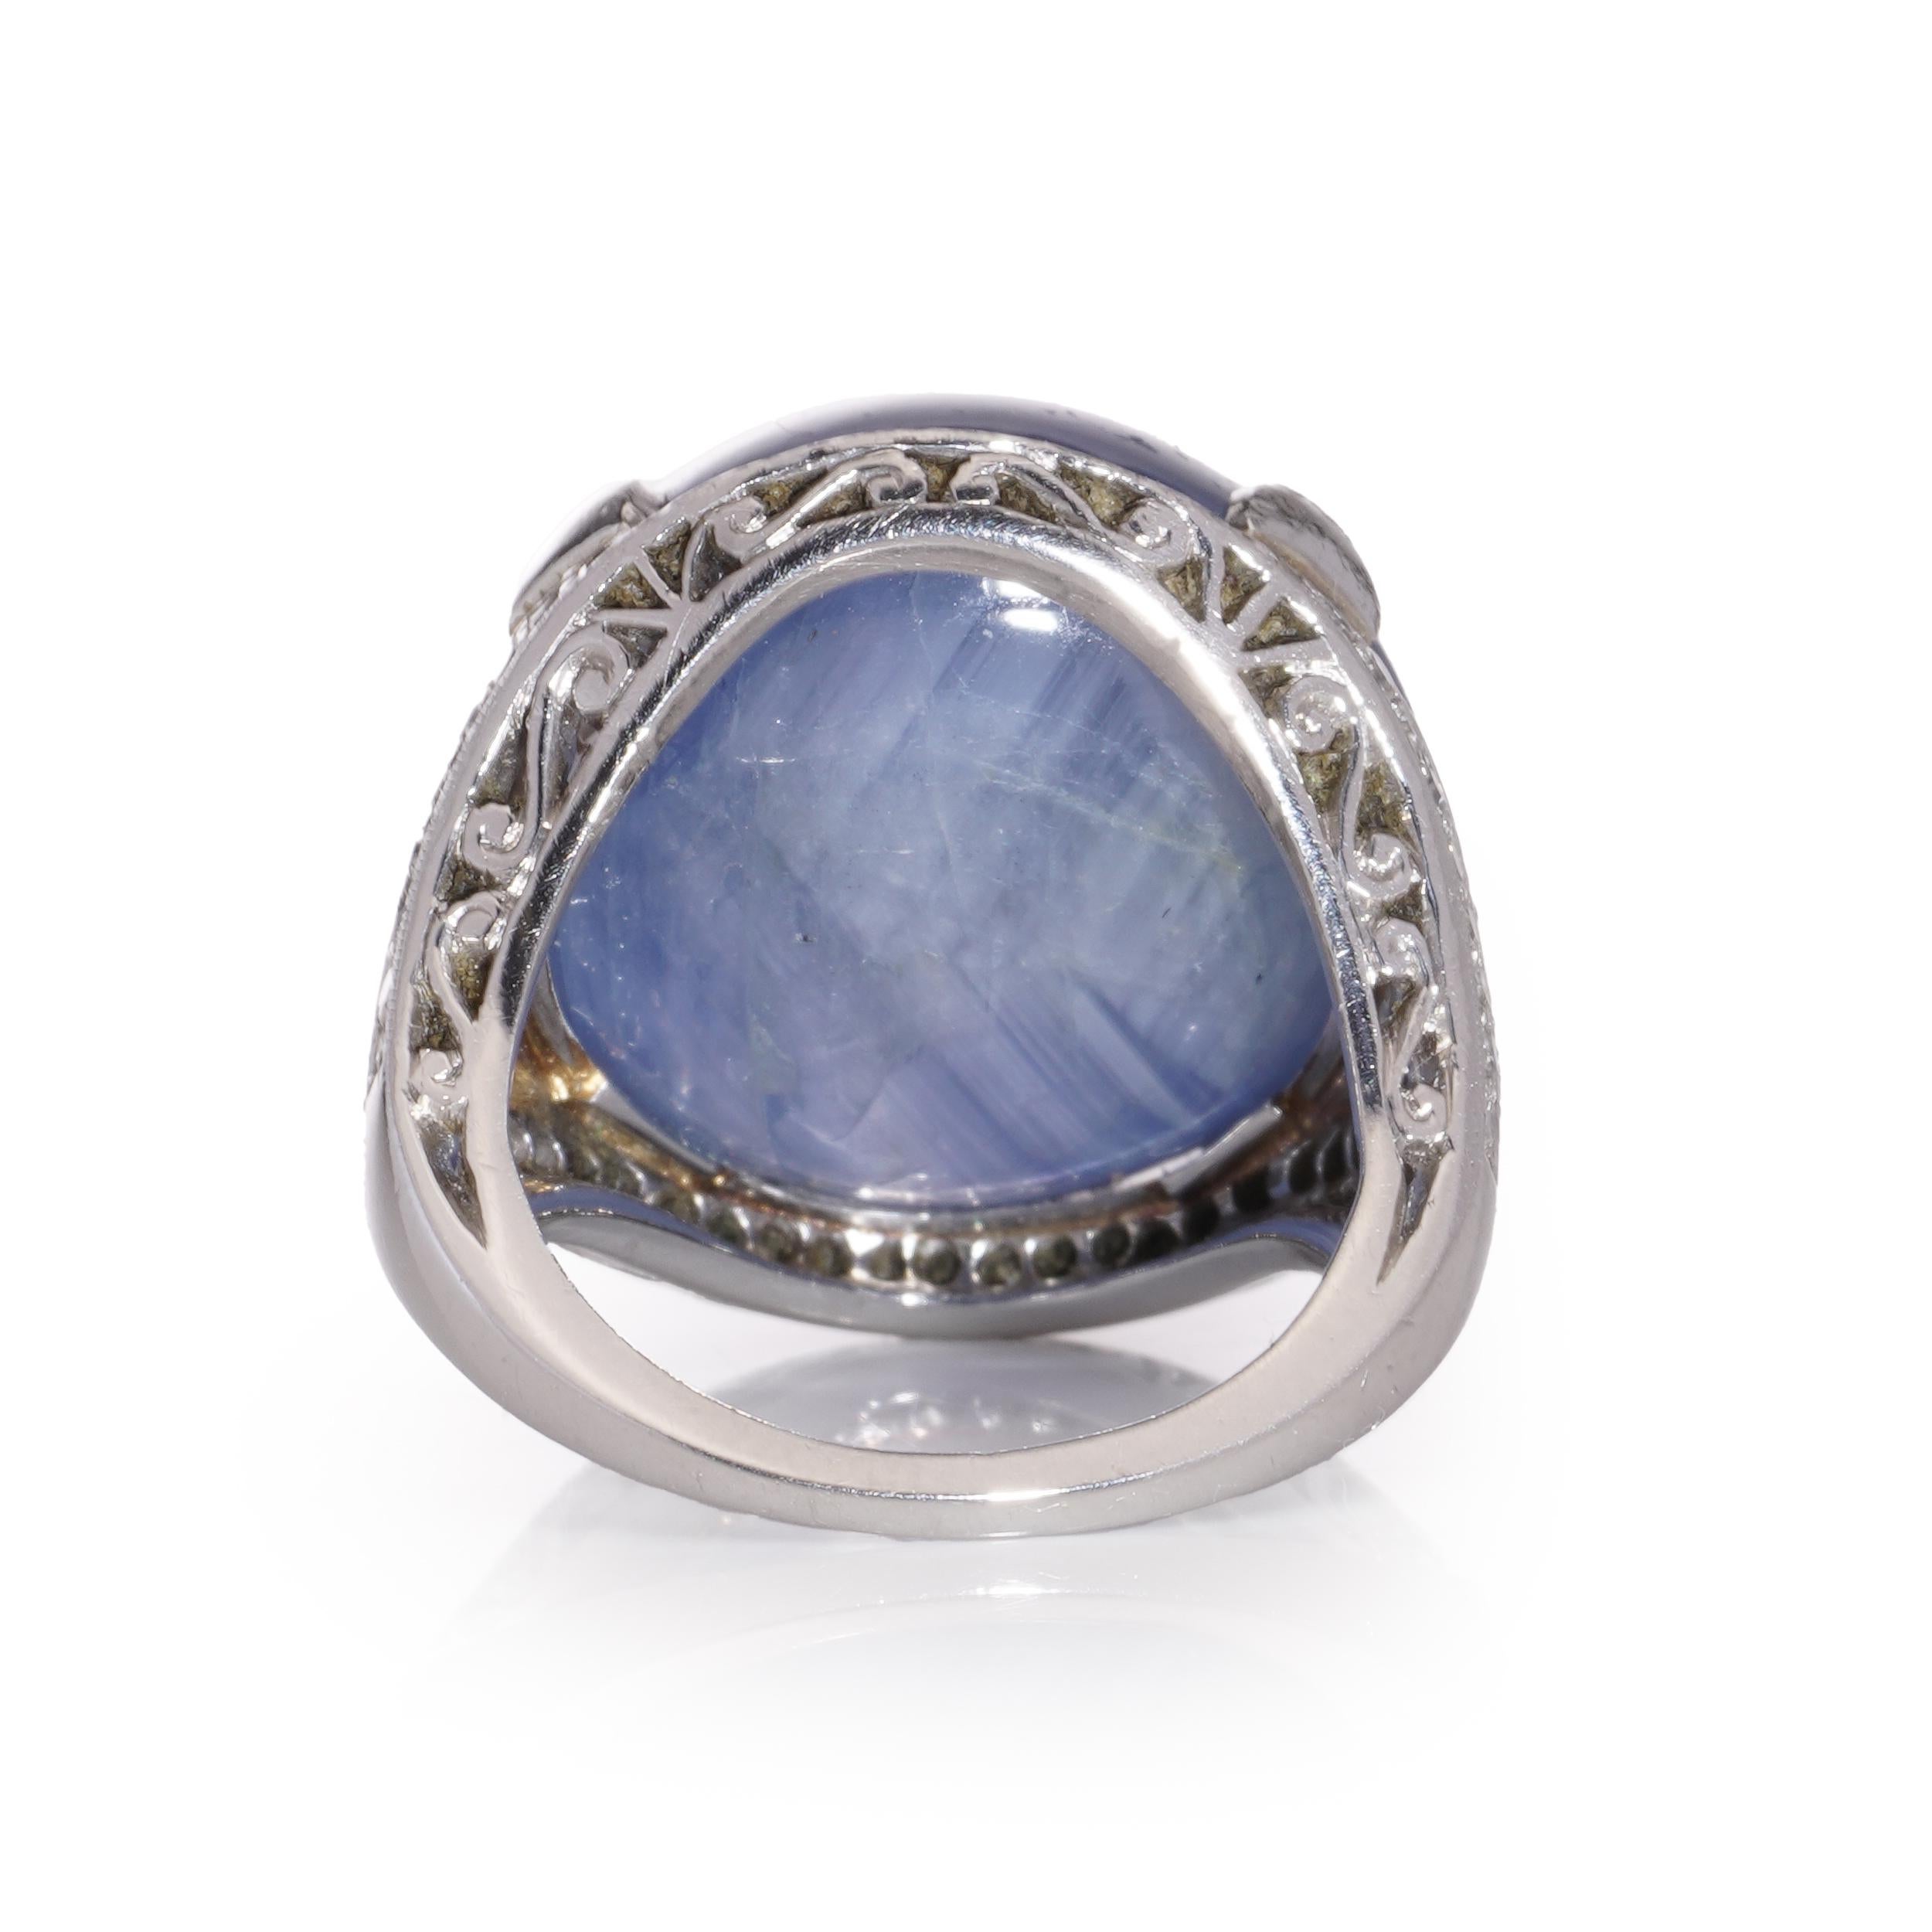 Platinum ladies' dome ring with approximately 46 cts. of round cabochon sapphire and diamond ring. 
X - Ray has been tested positive for platinum purity. 

Dimensions - 
Finger Size (UK) = H (EU) = 47 (US) = 4
Weight: 19 grams
Ring Size: 2.9 x 2.4 x